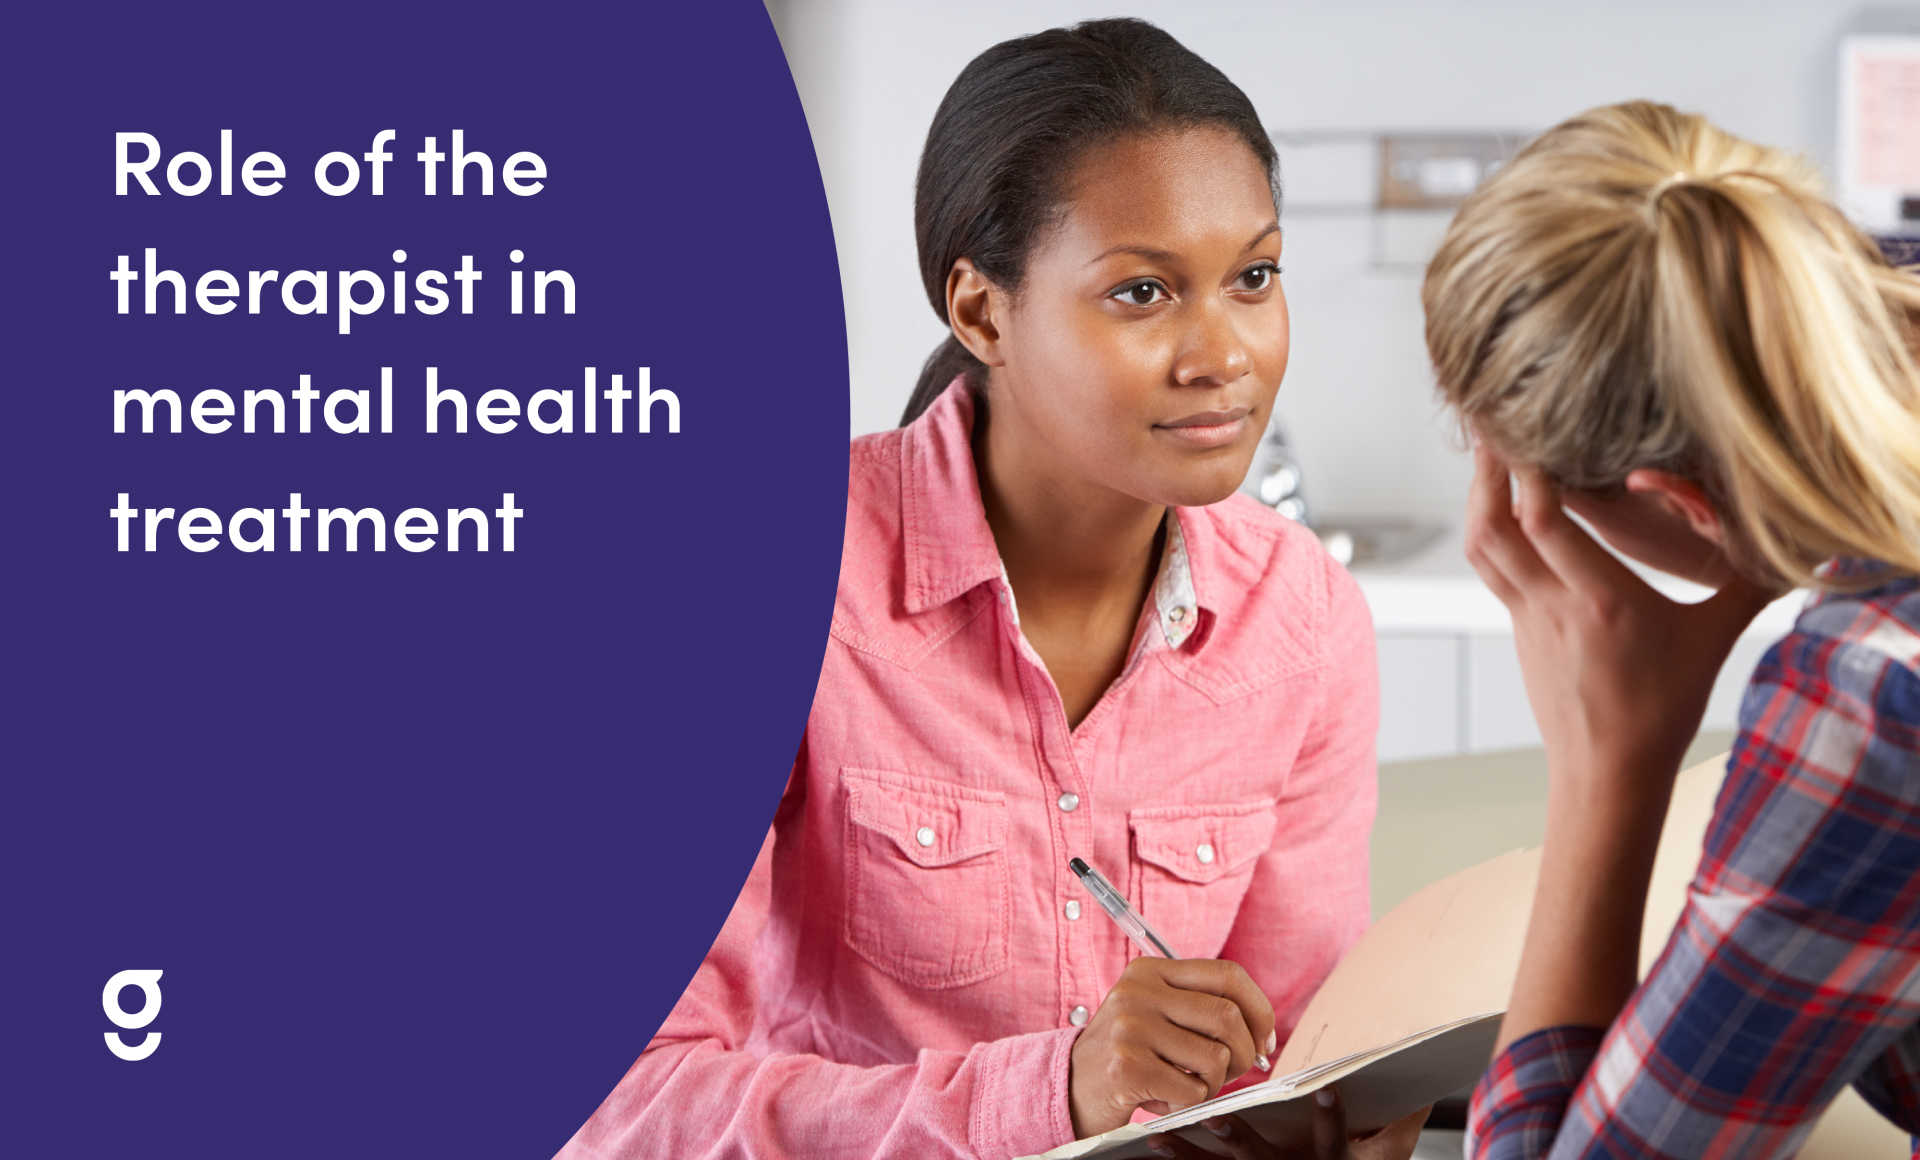 What Is the Role of the Therapist in Mental Health Treatment?